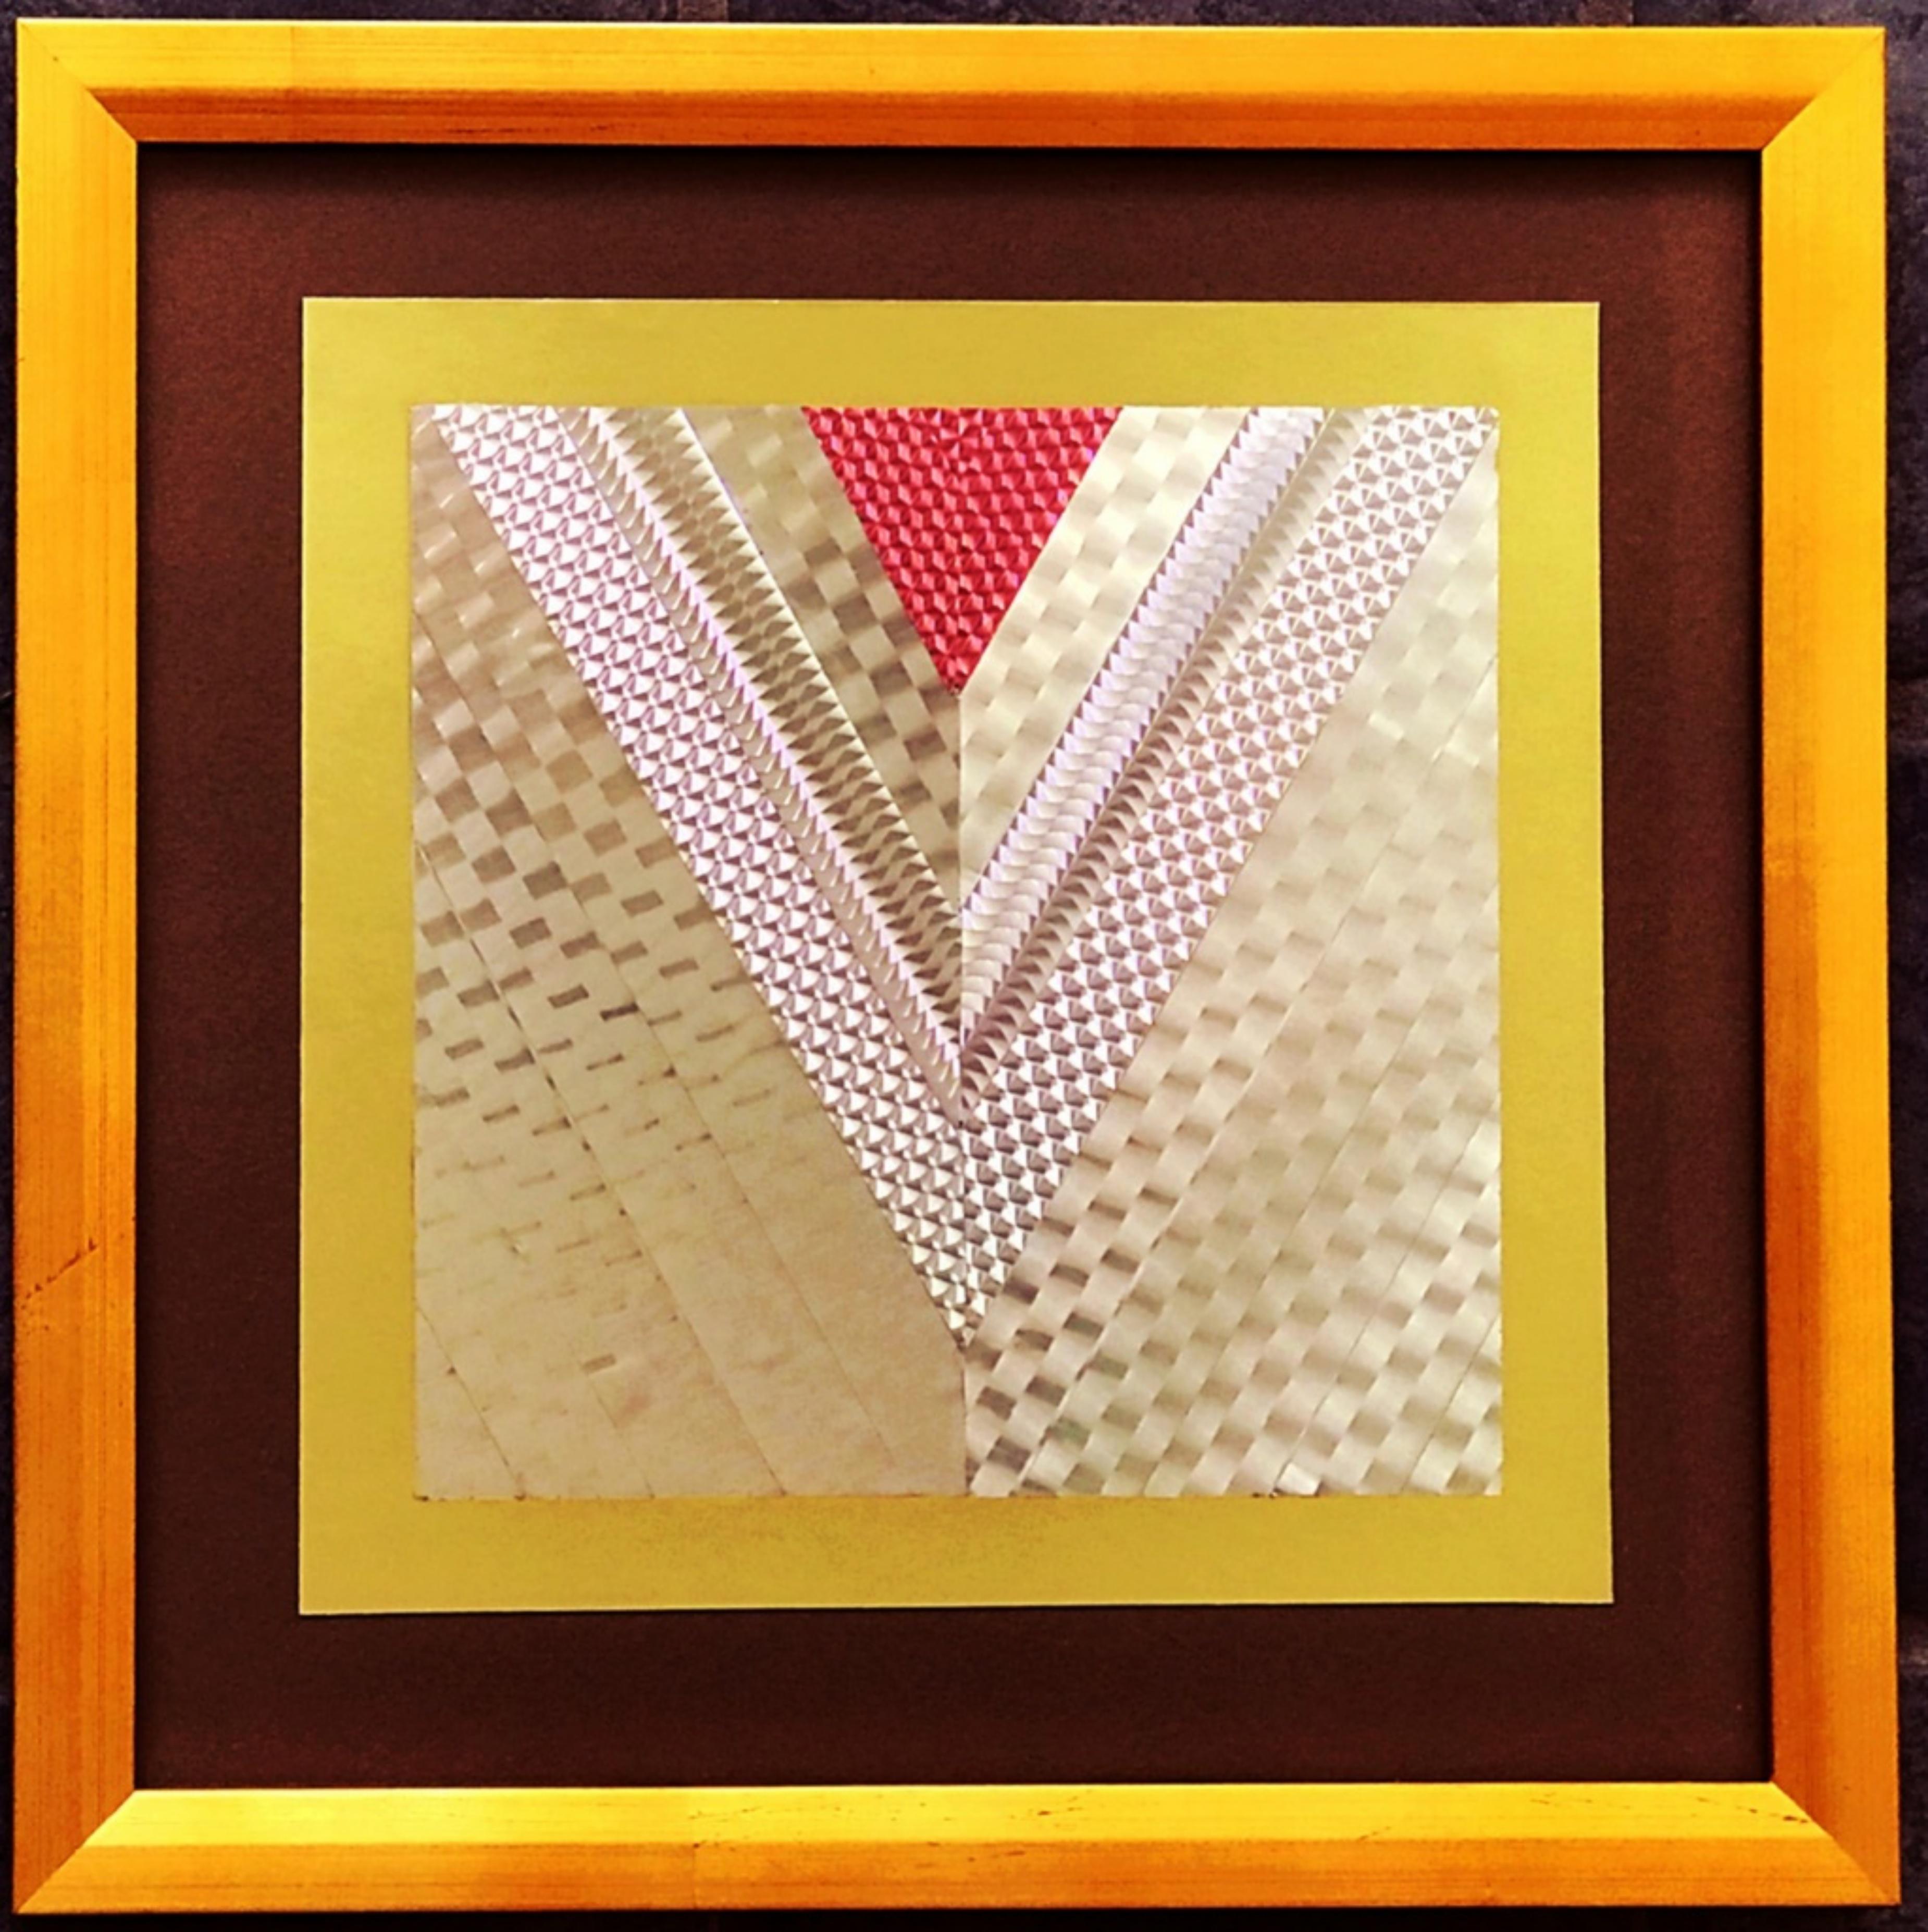 Untitled Chevron Collage, de-accessioned from the Honolulu Museum of Art  - Mixed Media Art by Kenneth Noland